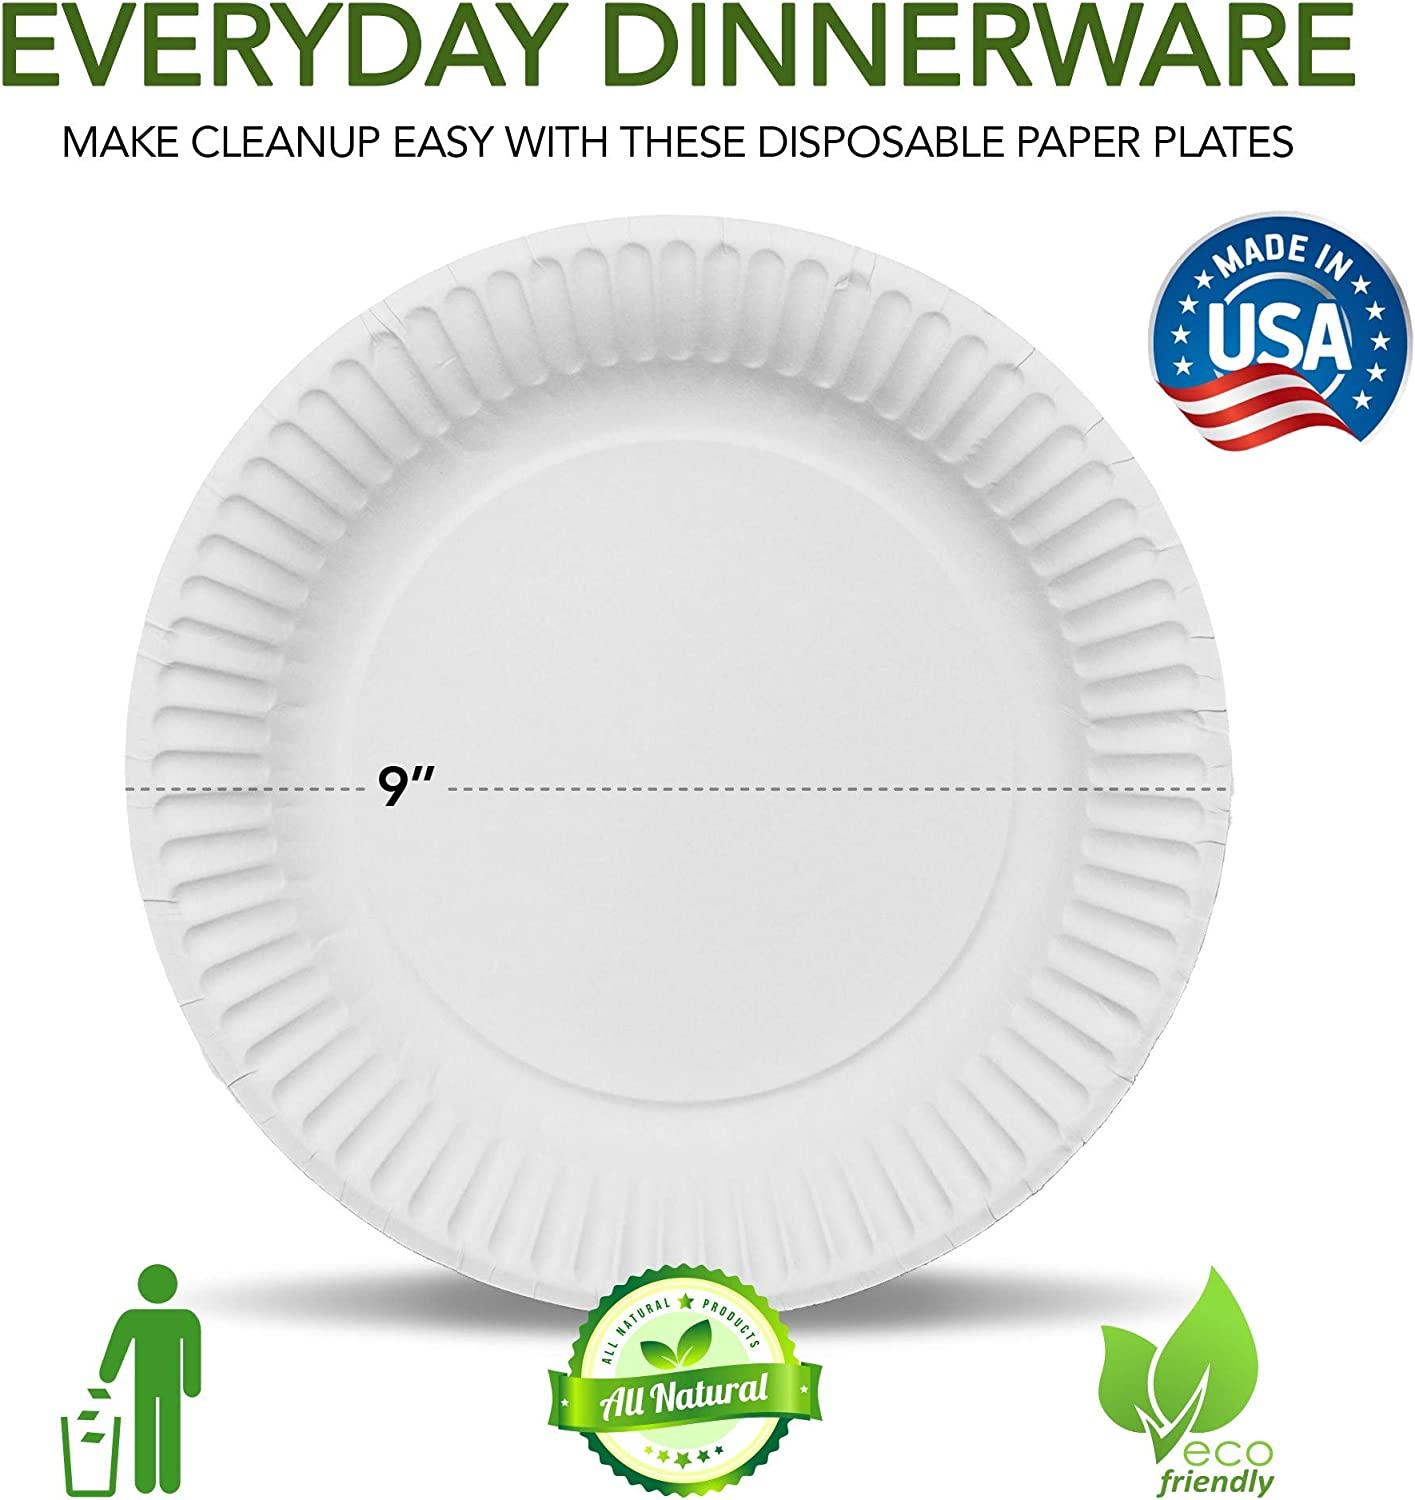 50 X Disposable Paper Plates Size 7 Inch For All Occasions Outdoor